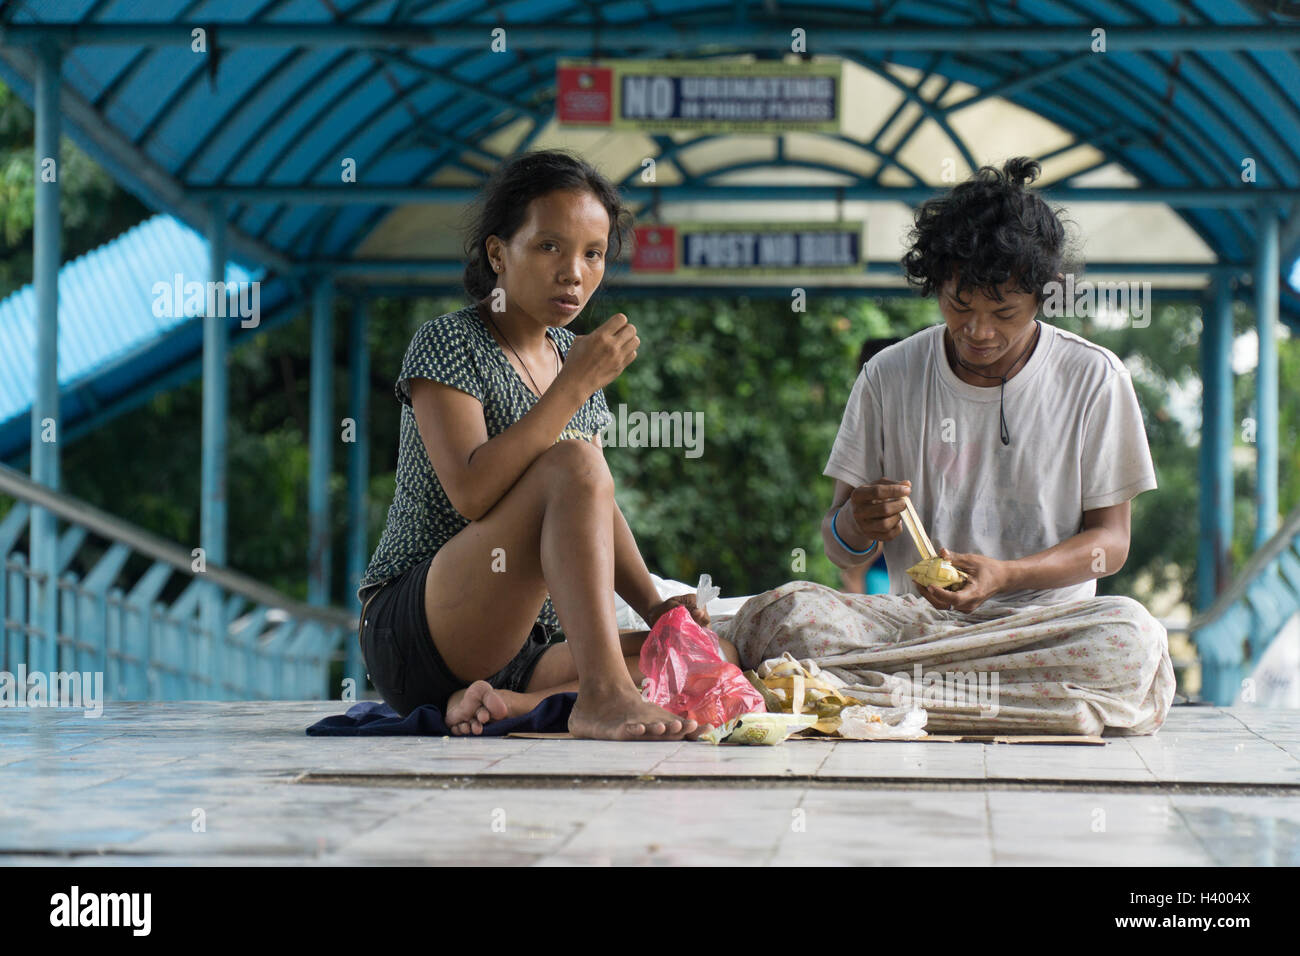 Homeless man & woman sit eating food within an elevated skywalk in Cebu City,Philippines Stock Photo